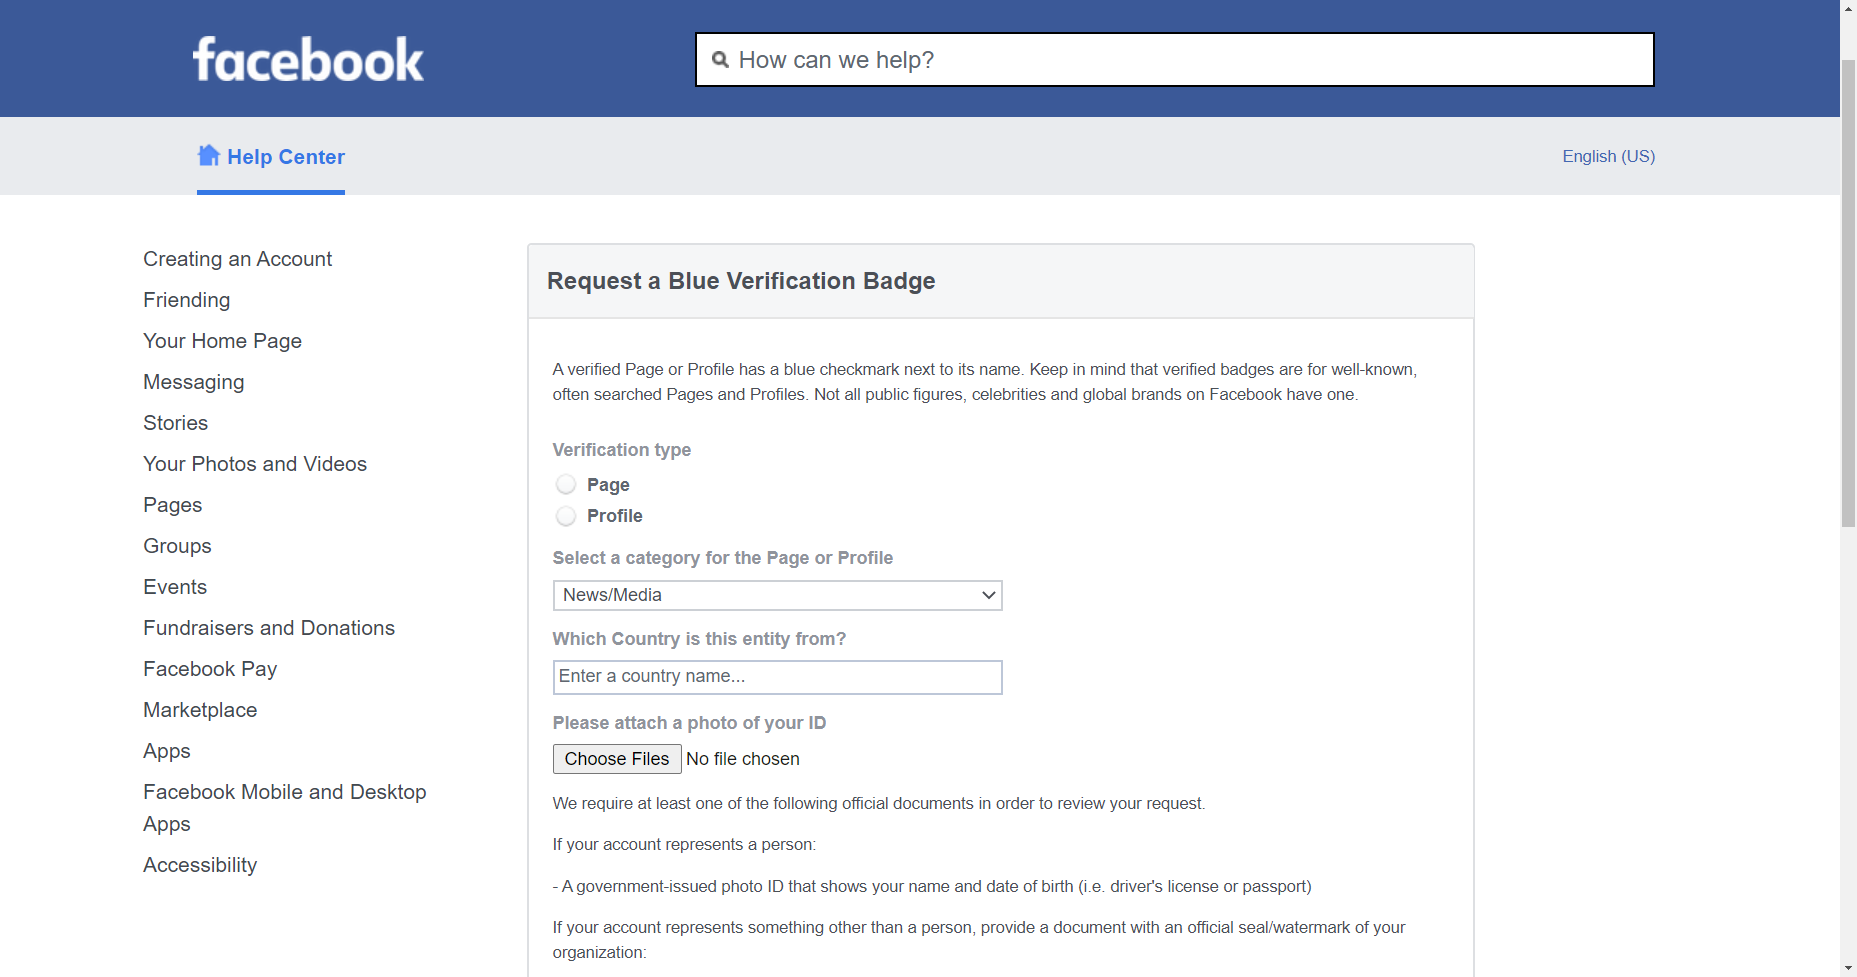 Facebook To Offer Verified Accounts & Higher Visibility To Top Users